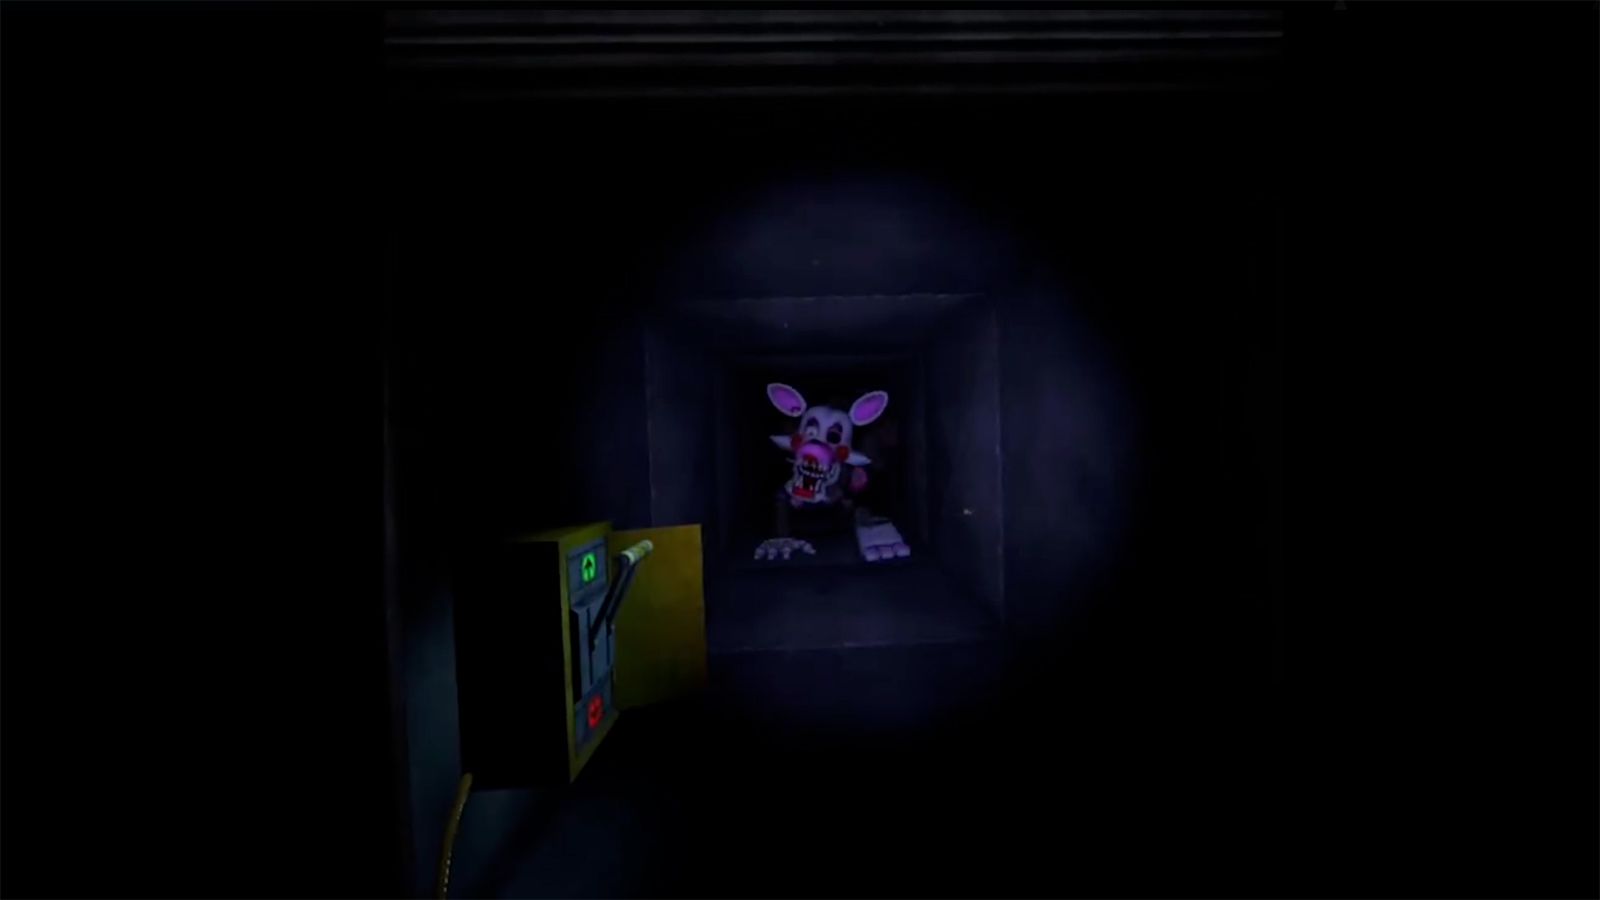 Five Nights at Freddy's: Help Wanted on Meta Quest